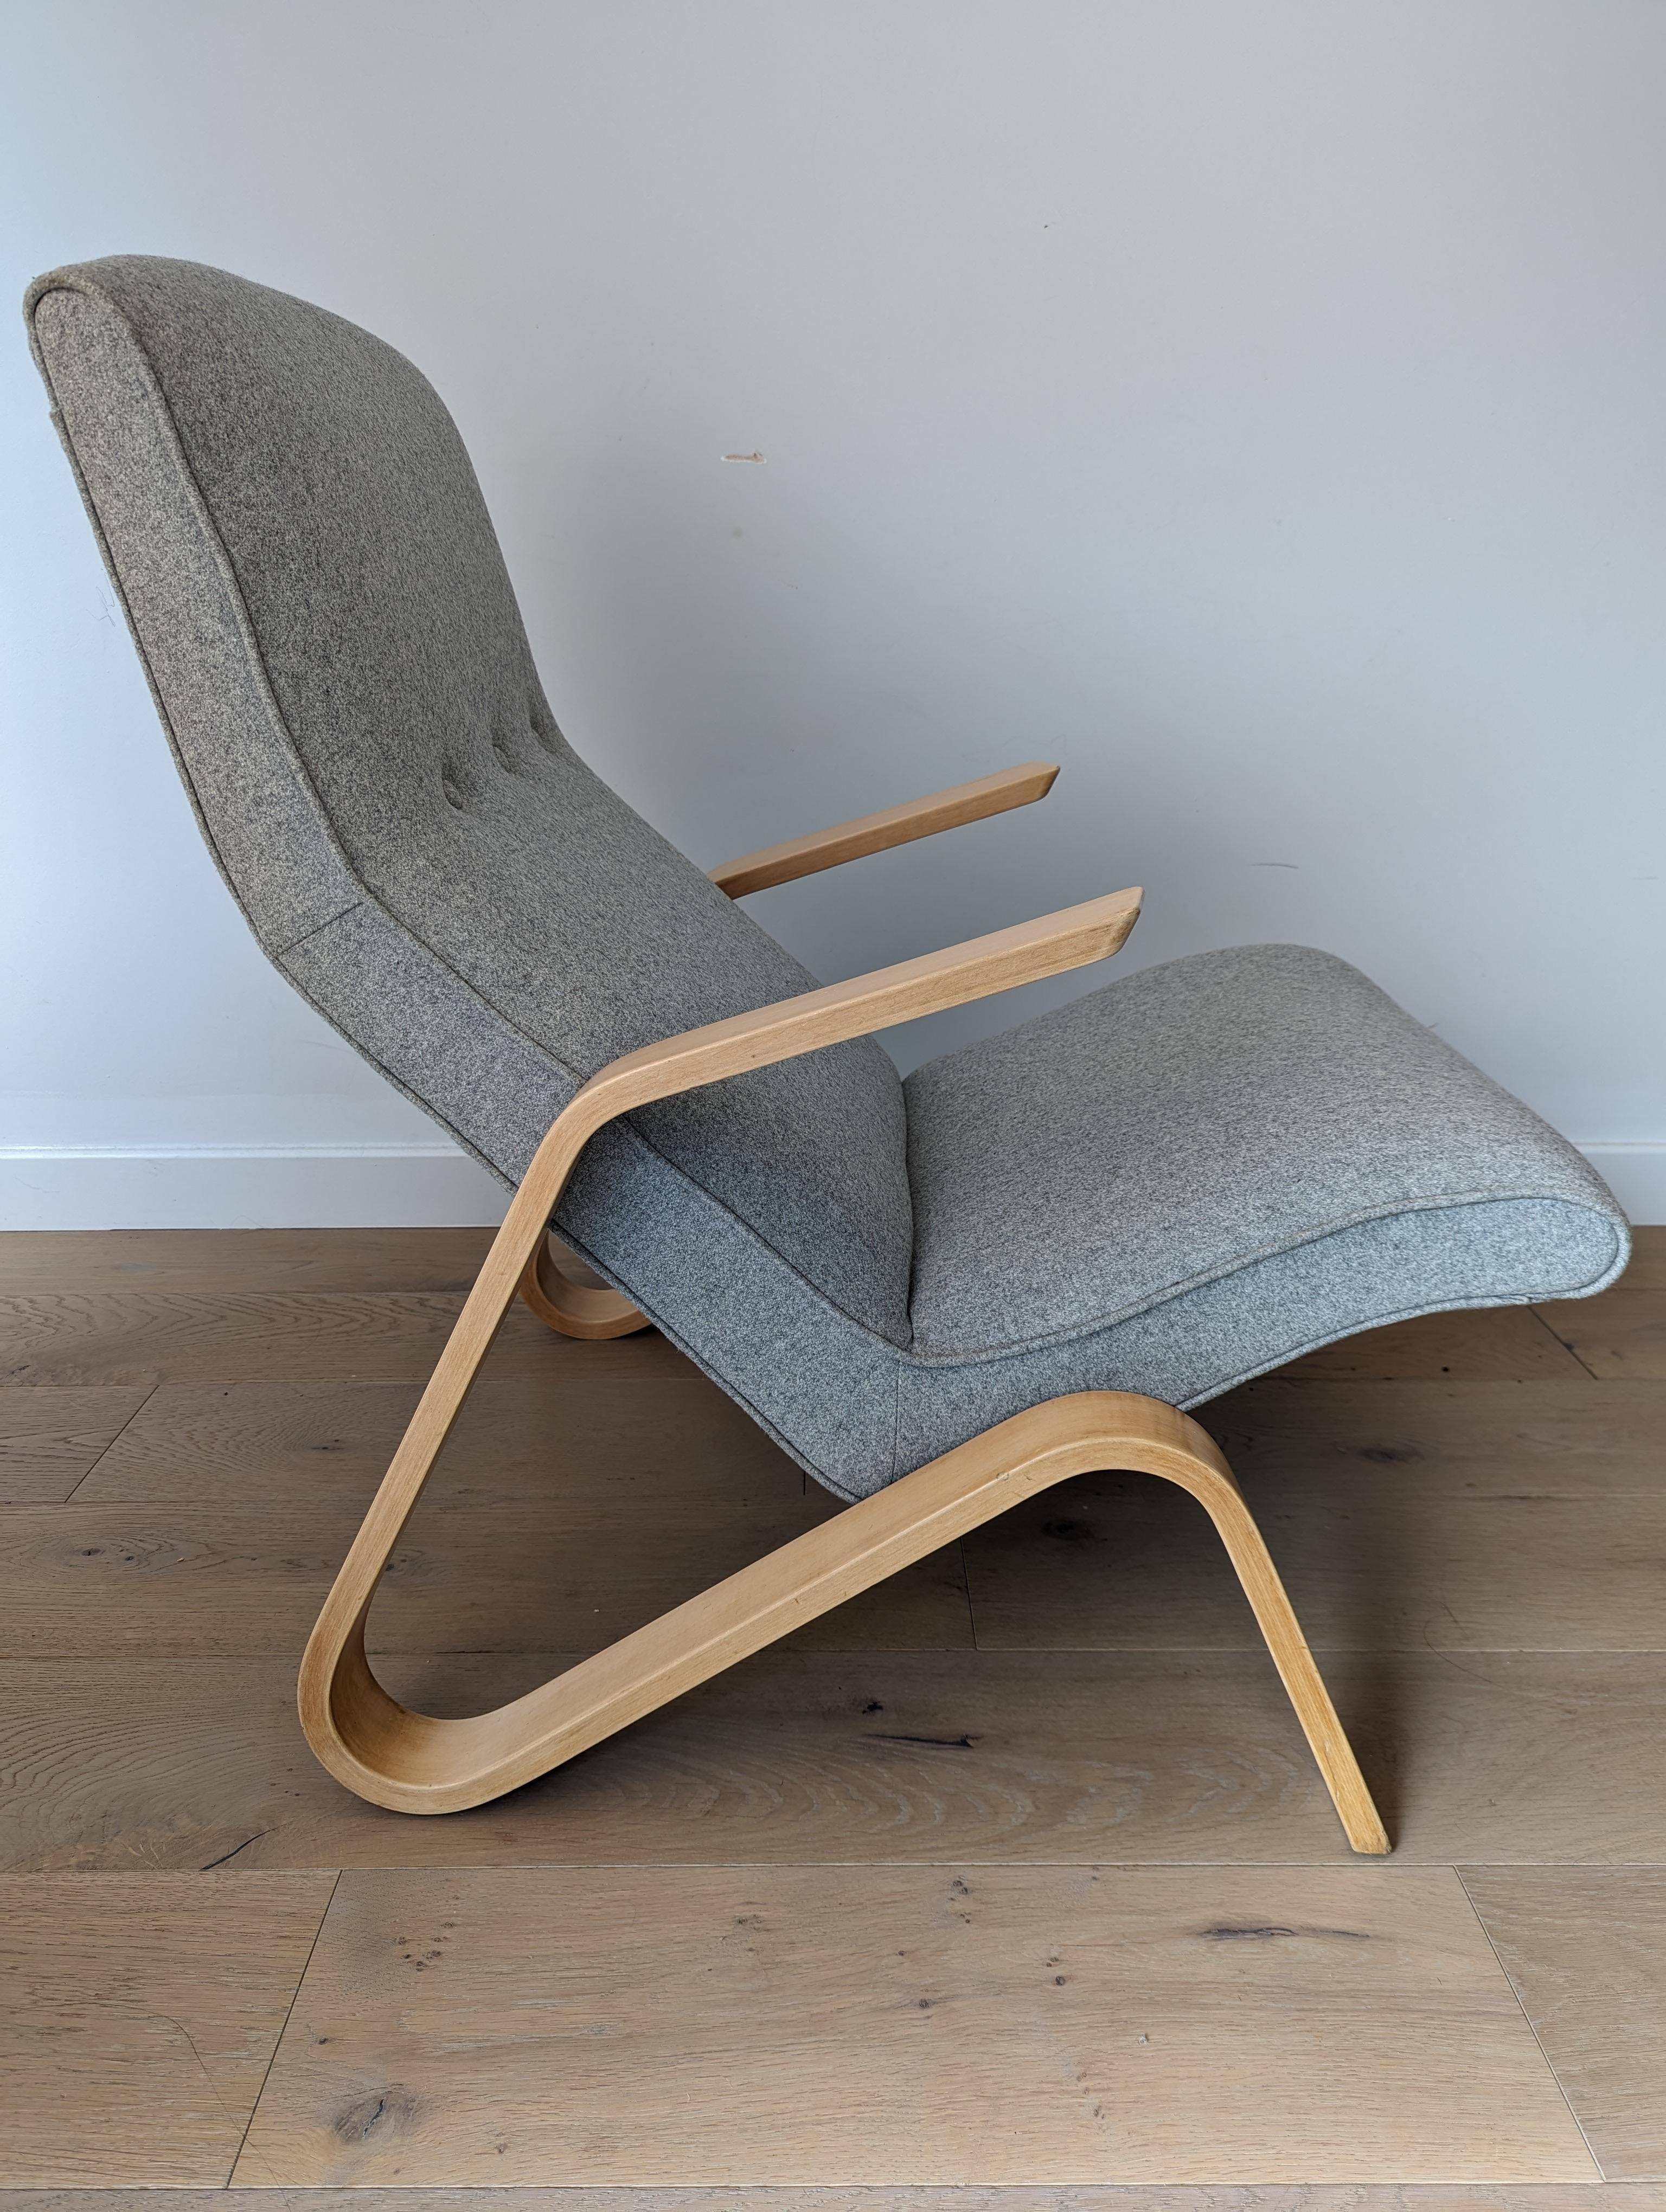 Mid-Century Modern Mid-century Grasshopper chair by Eero Saarinen for Knoll (1950s) For Sale